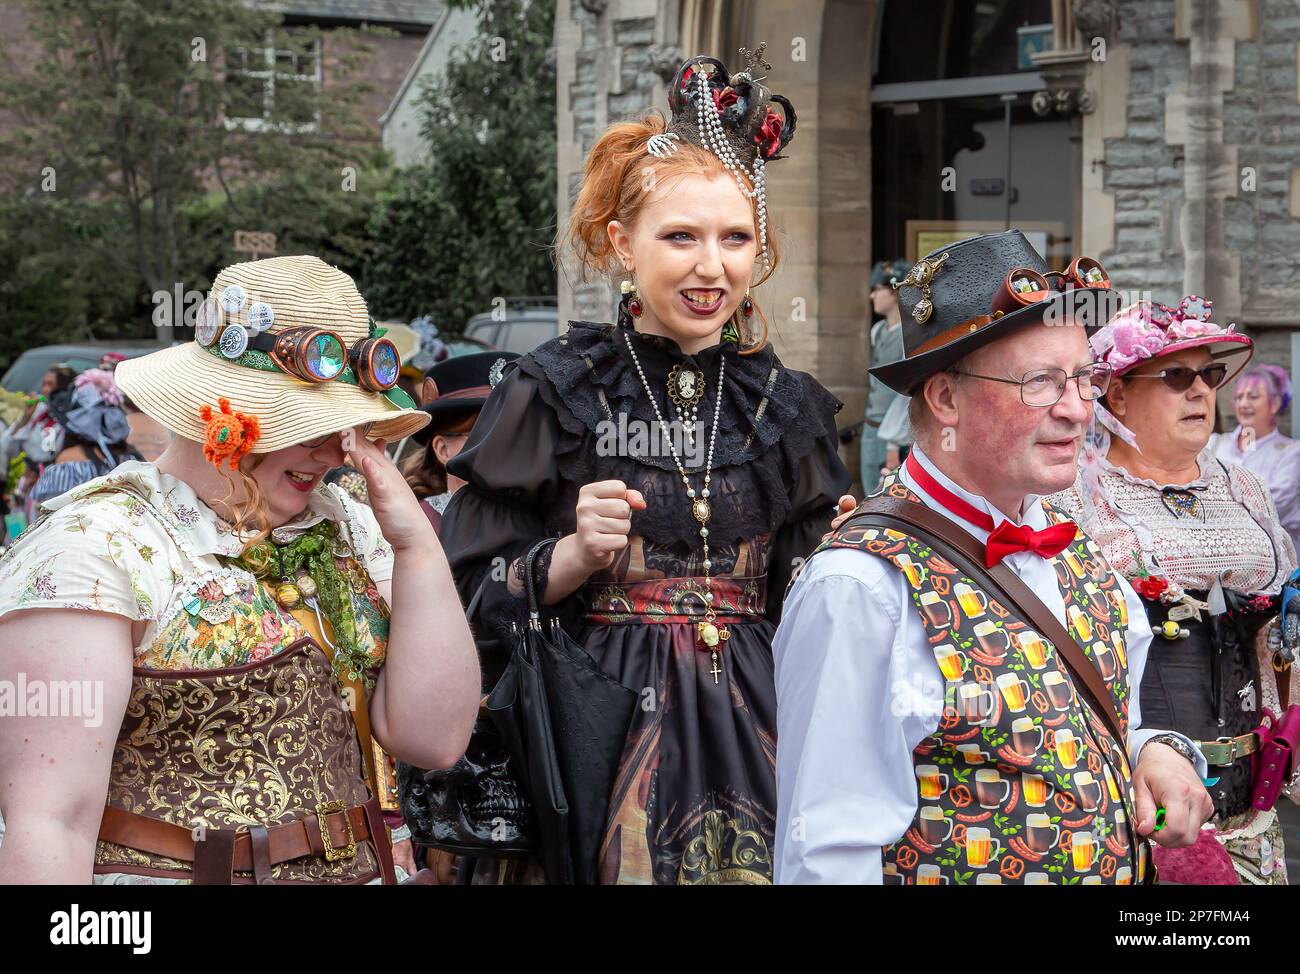 A group of steampunks walking in procession along a street. Stock Photo